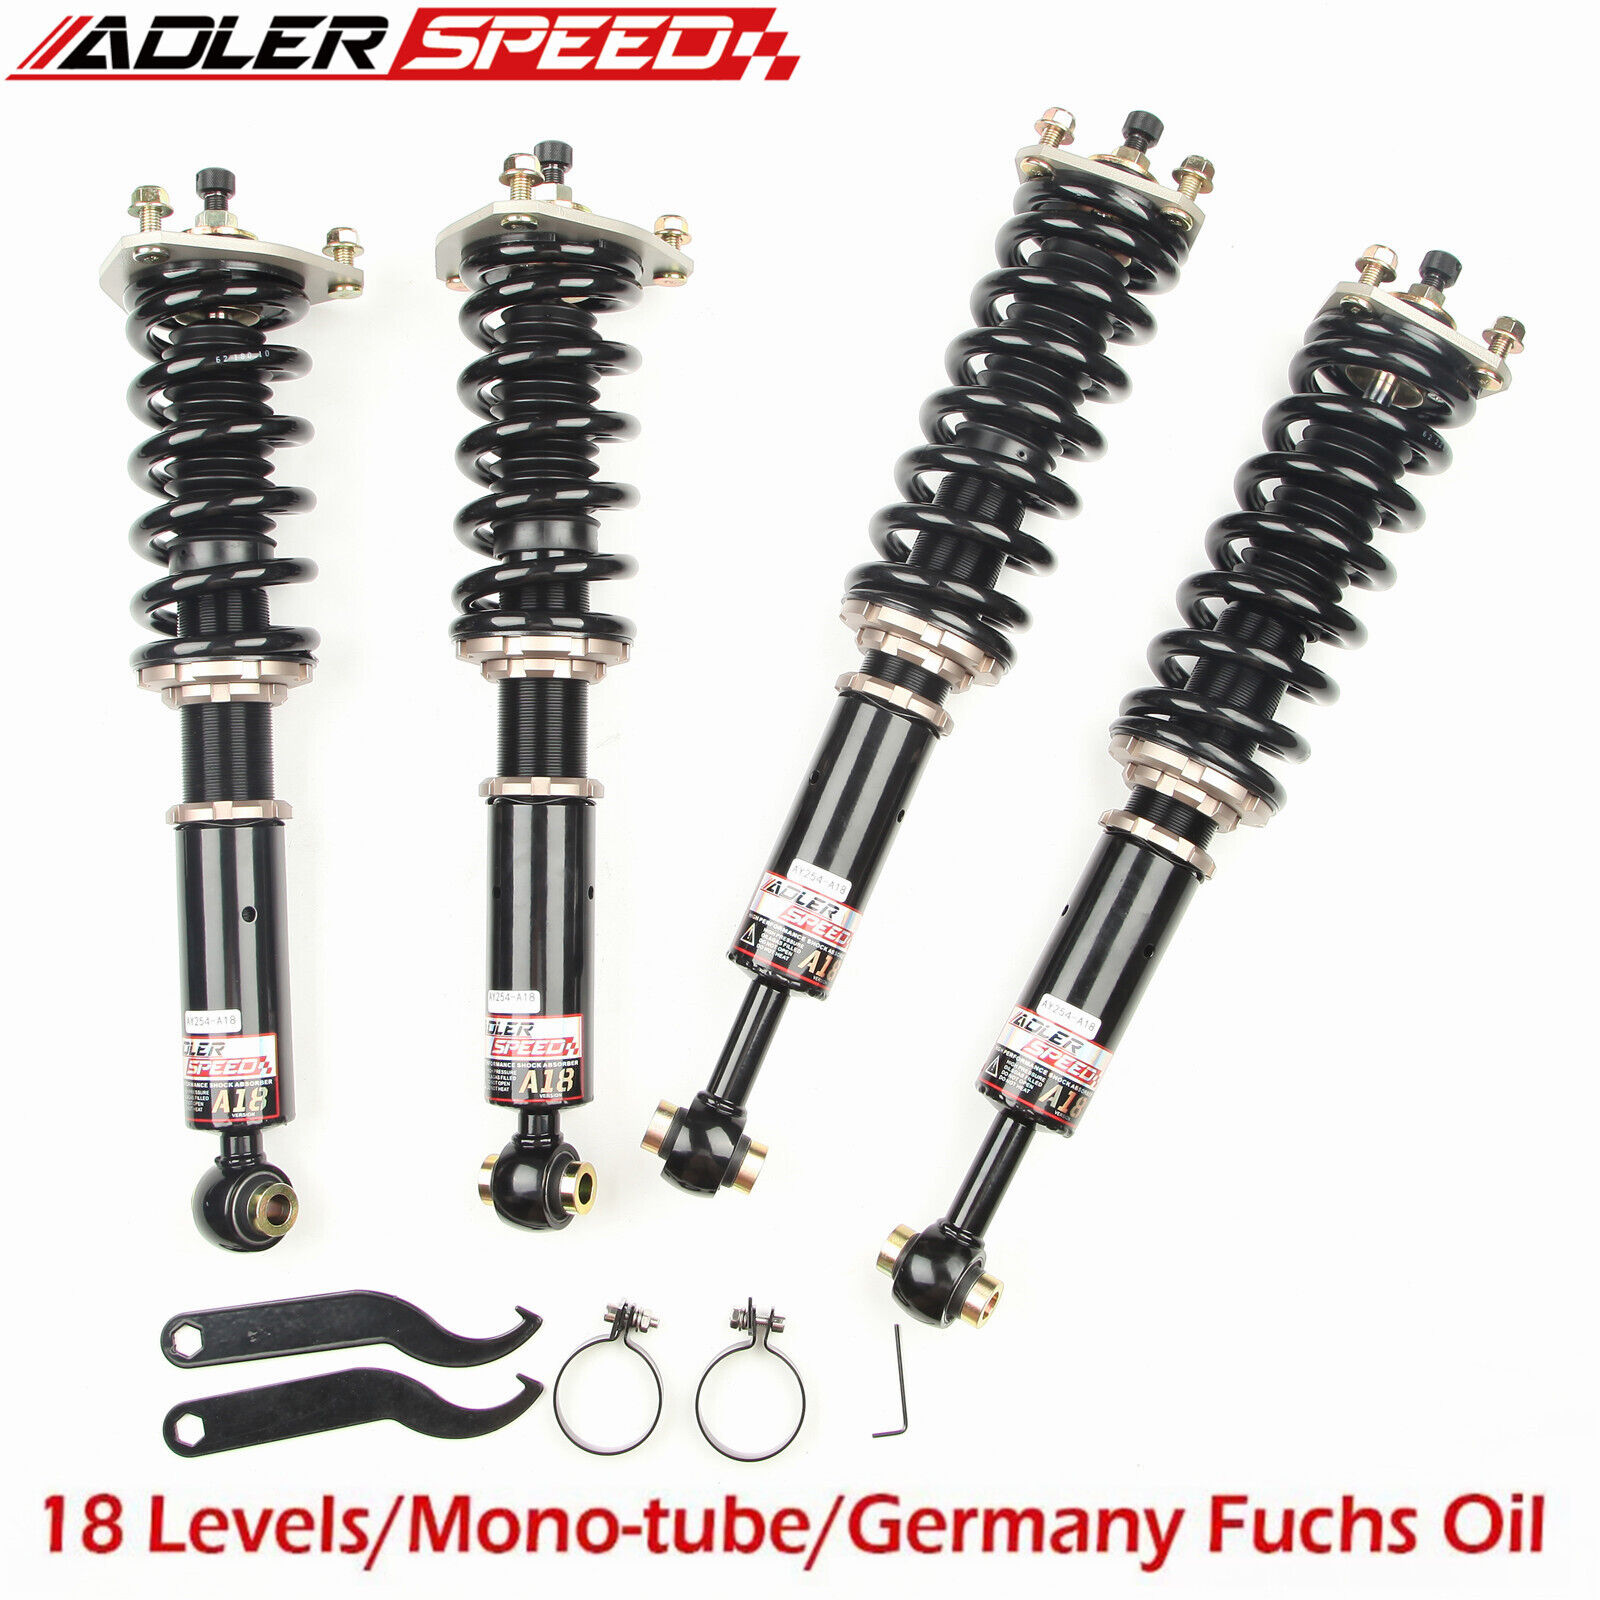 Coilovers Kit for 1998-05 GS300 GS400 GS430 18 Level Adj. Height Lowering Shocks